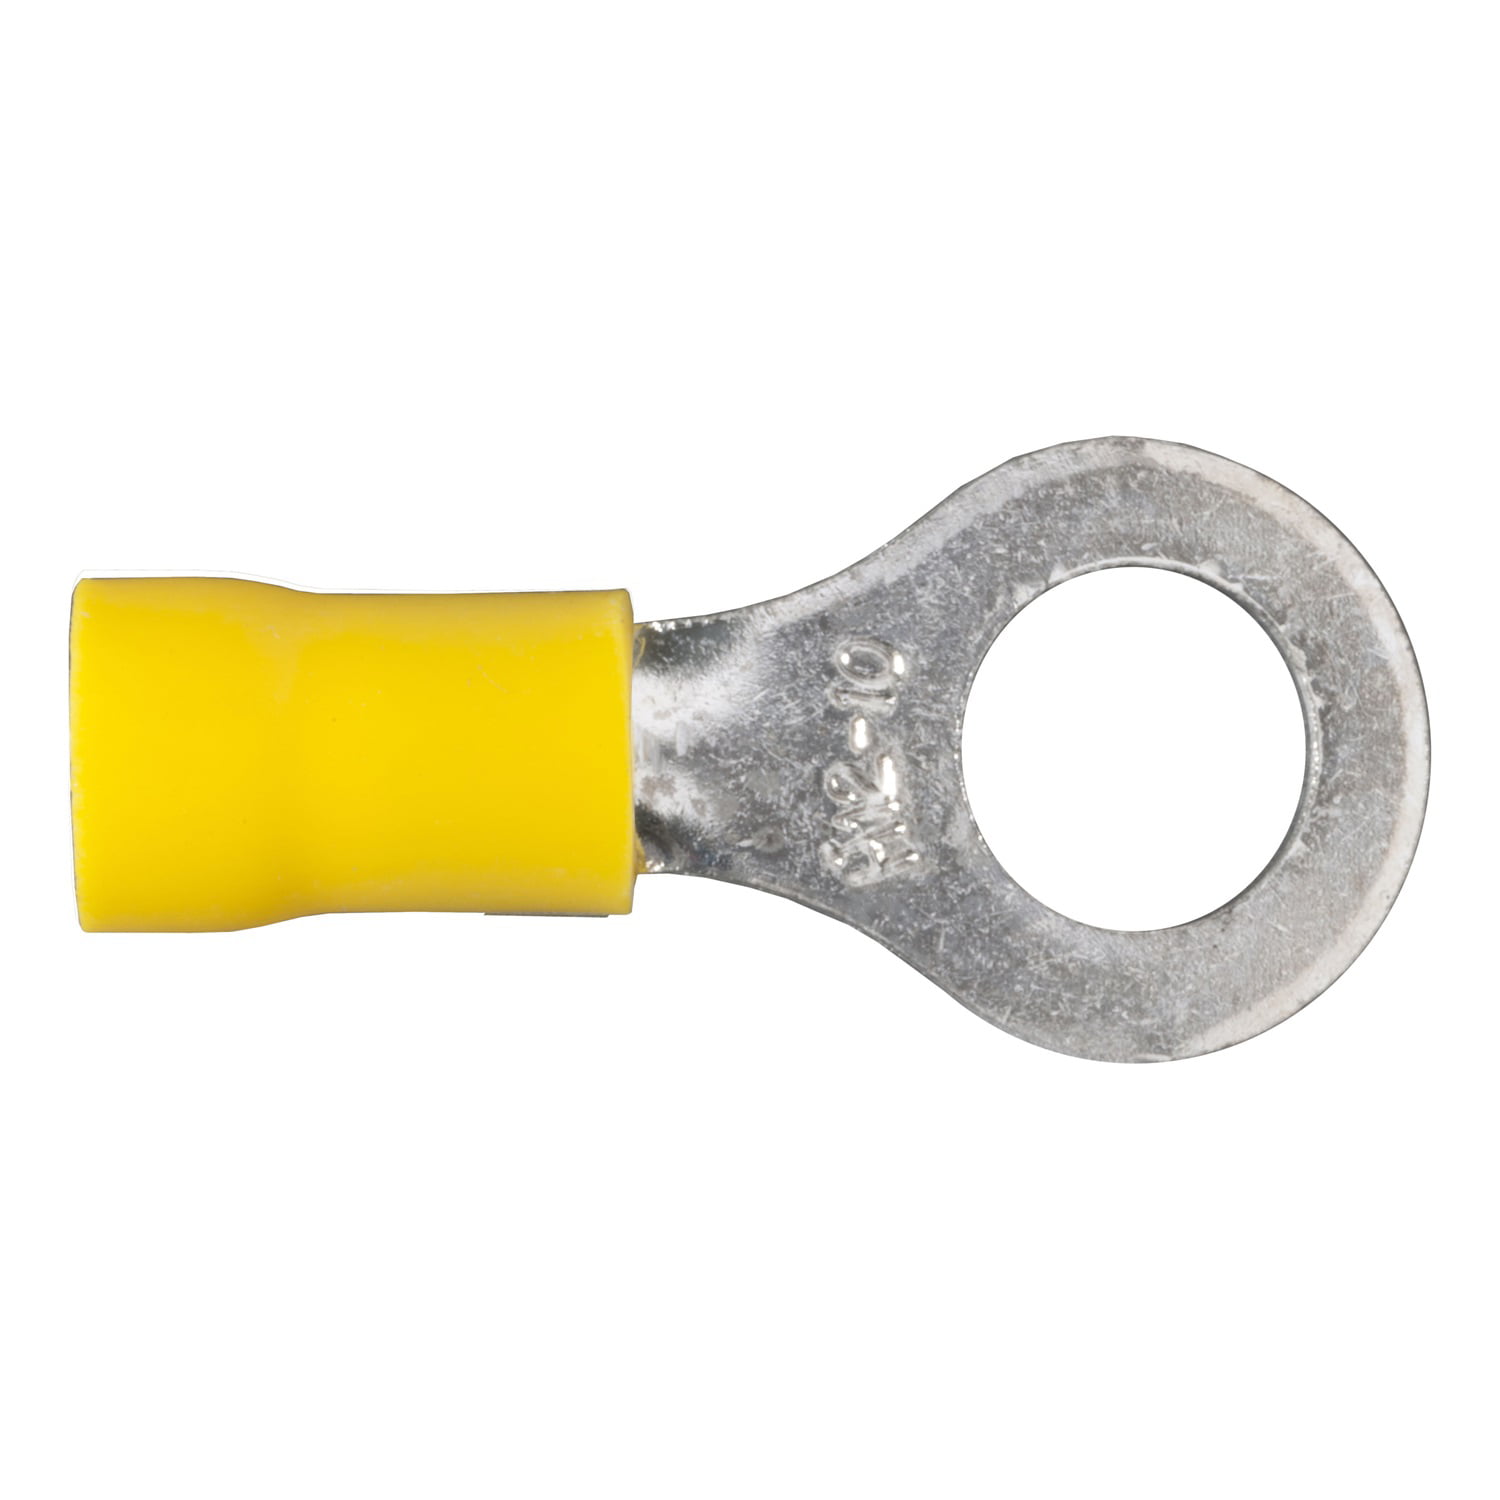 10 x 10mm YELLOW INSULATED RING CRIMP CONNECTOR TERMINAL h/d 